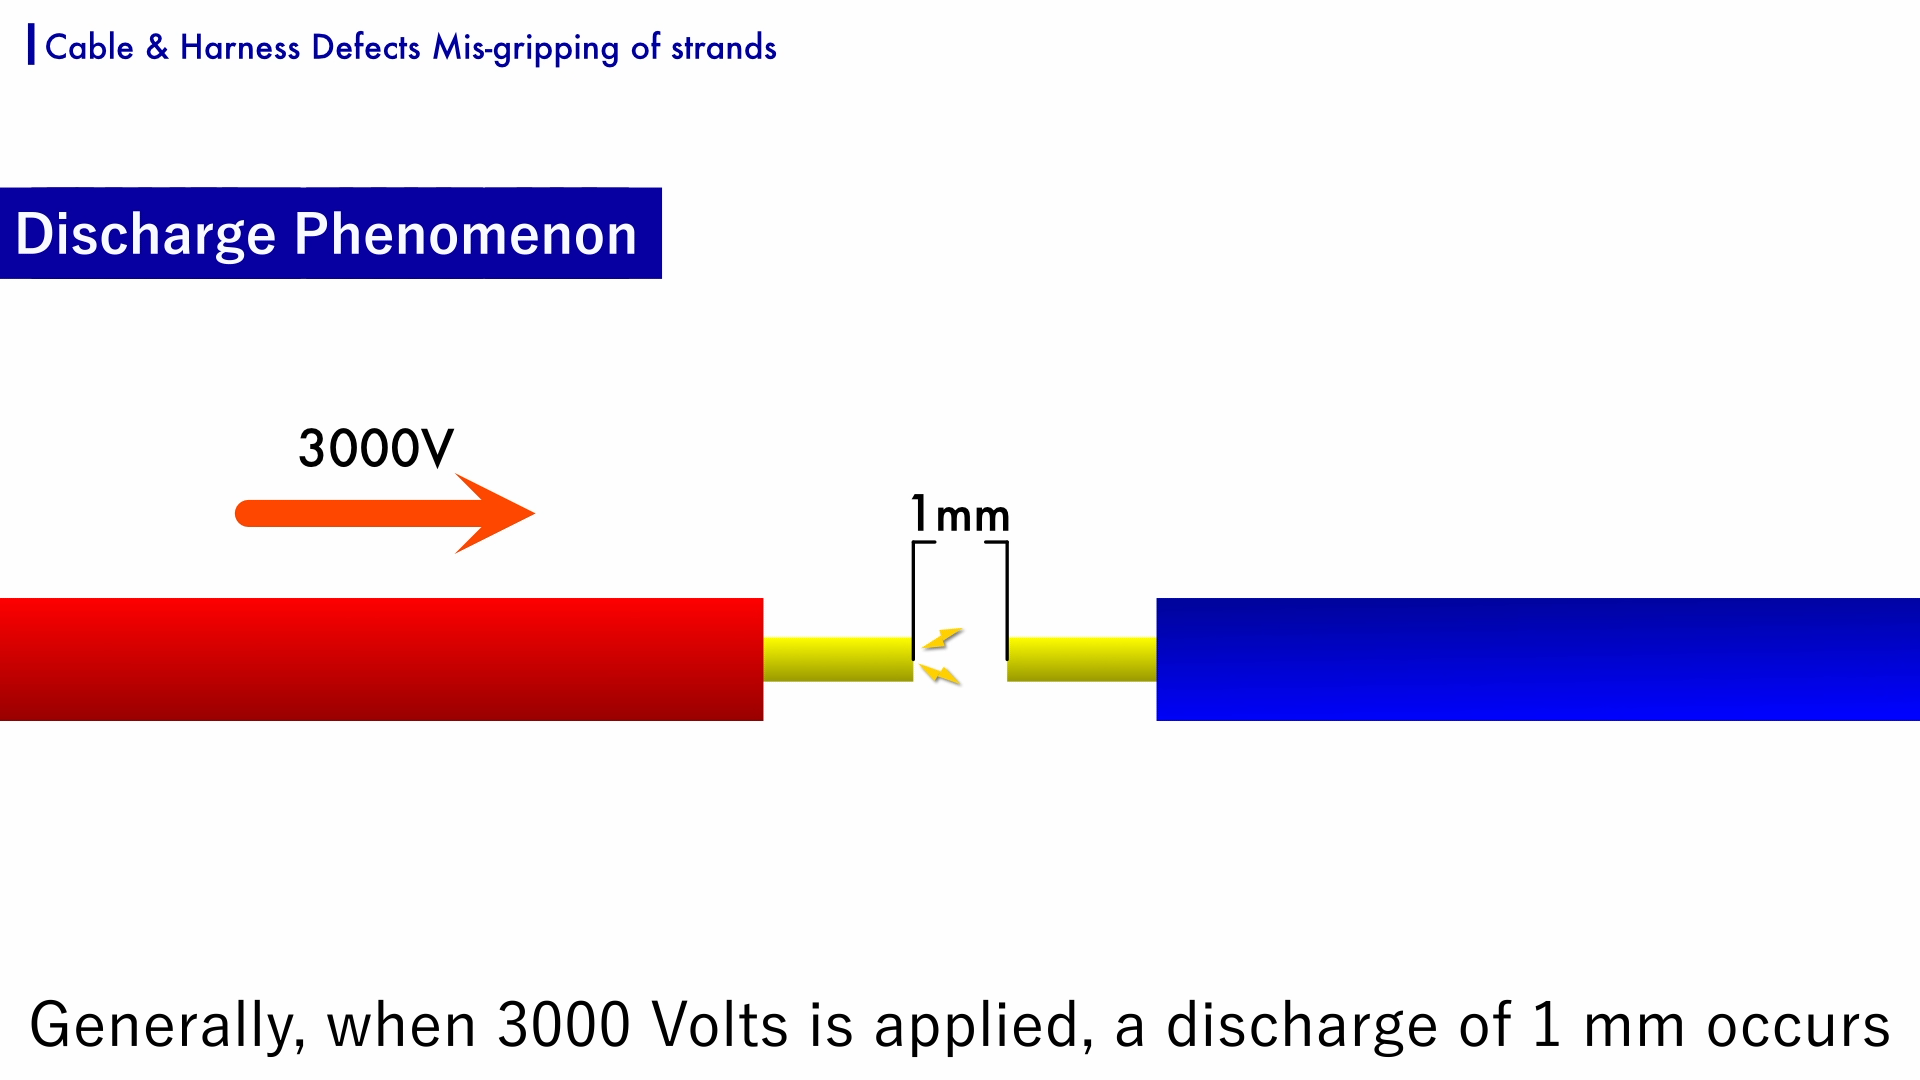 Generally, when 3000 Volts is applied, a discharge of 1 mm occurs.